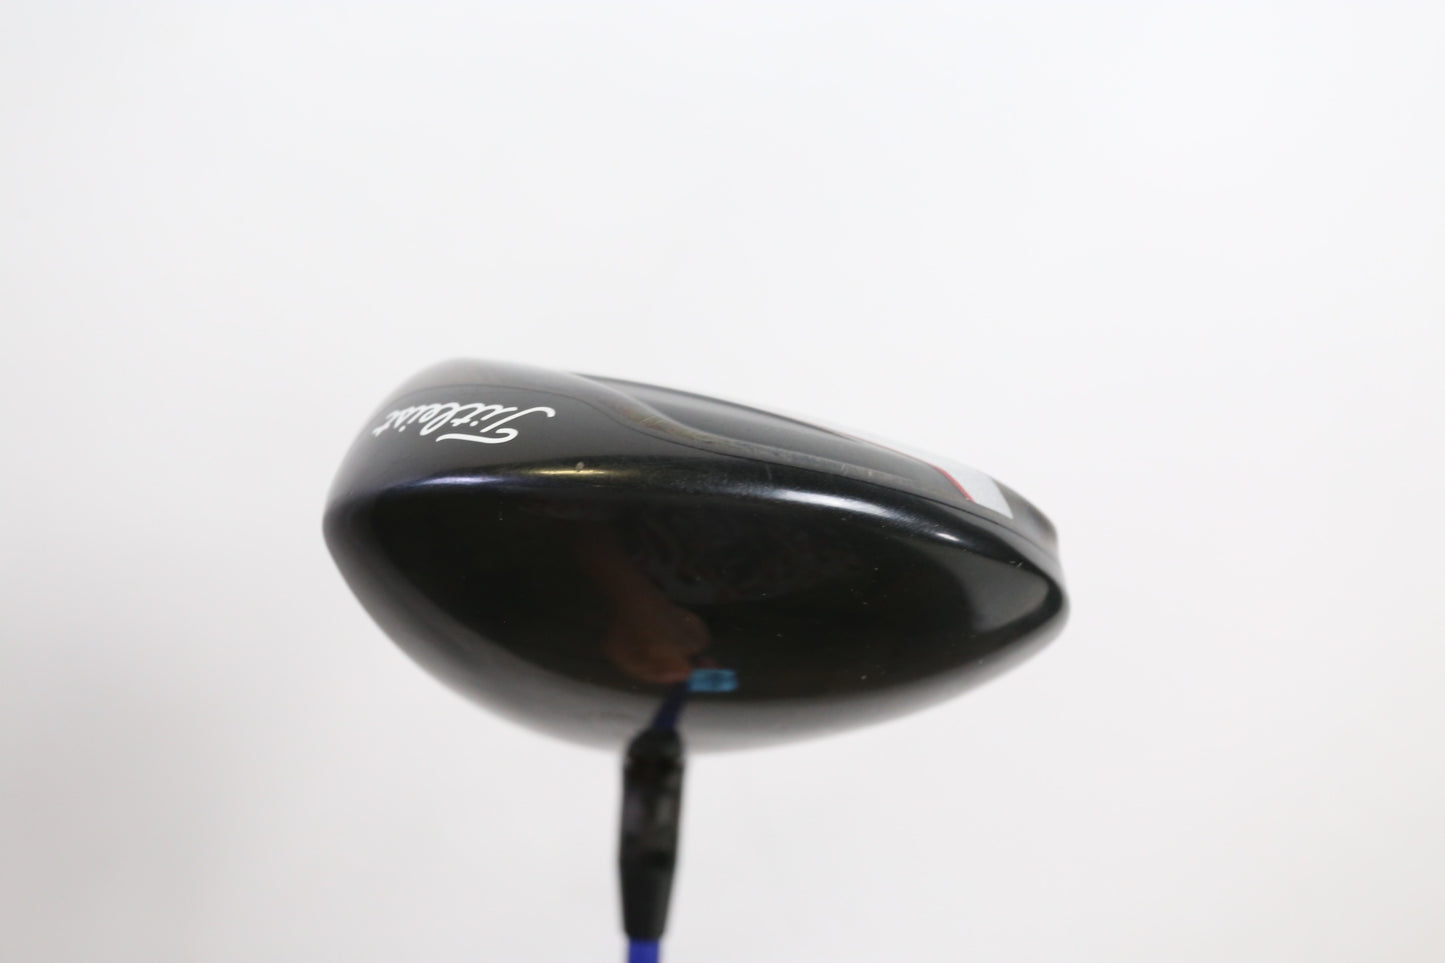 Used Titleist 913D2 Driver - Right-Handed - 9.5 Degrees - Stiff Flex